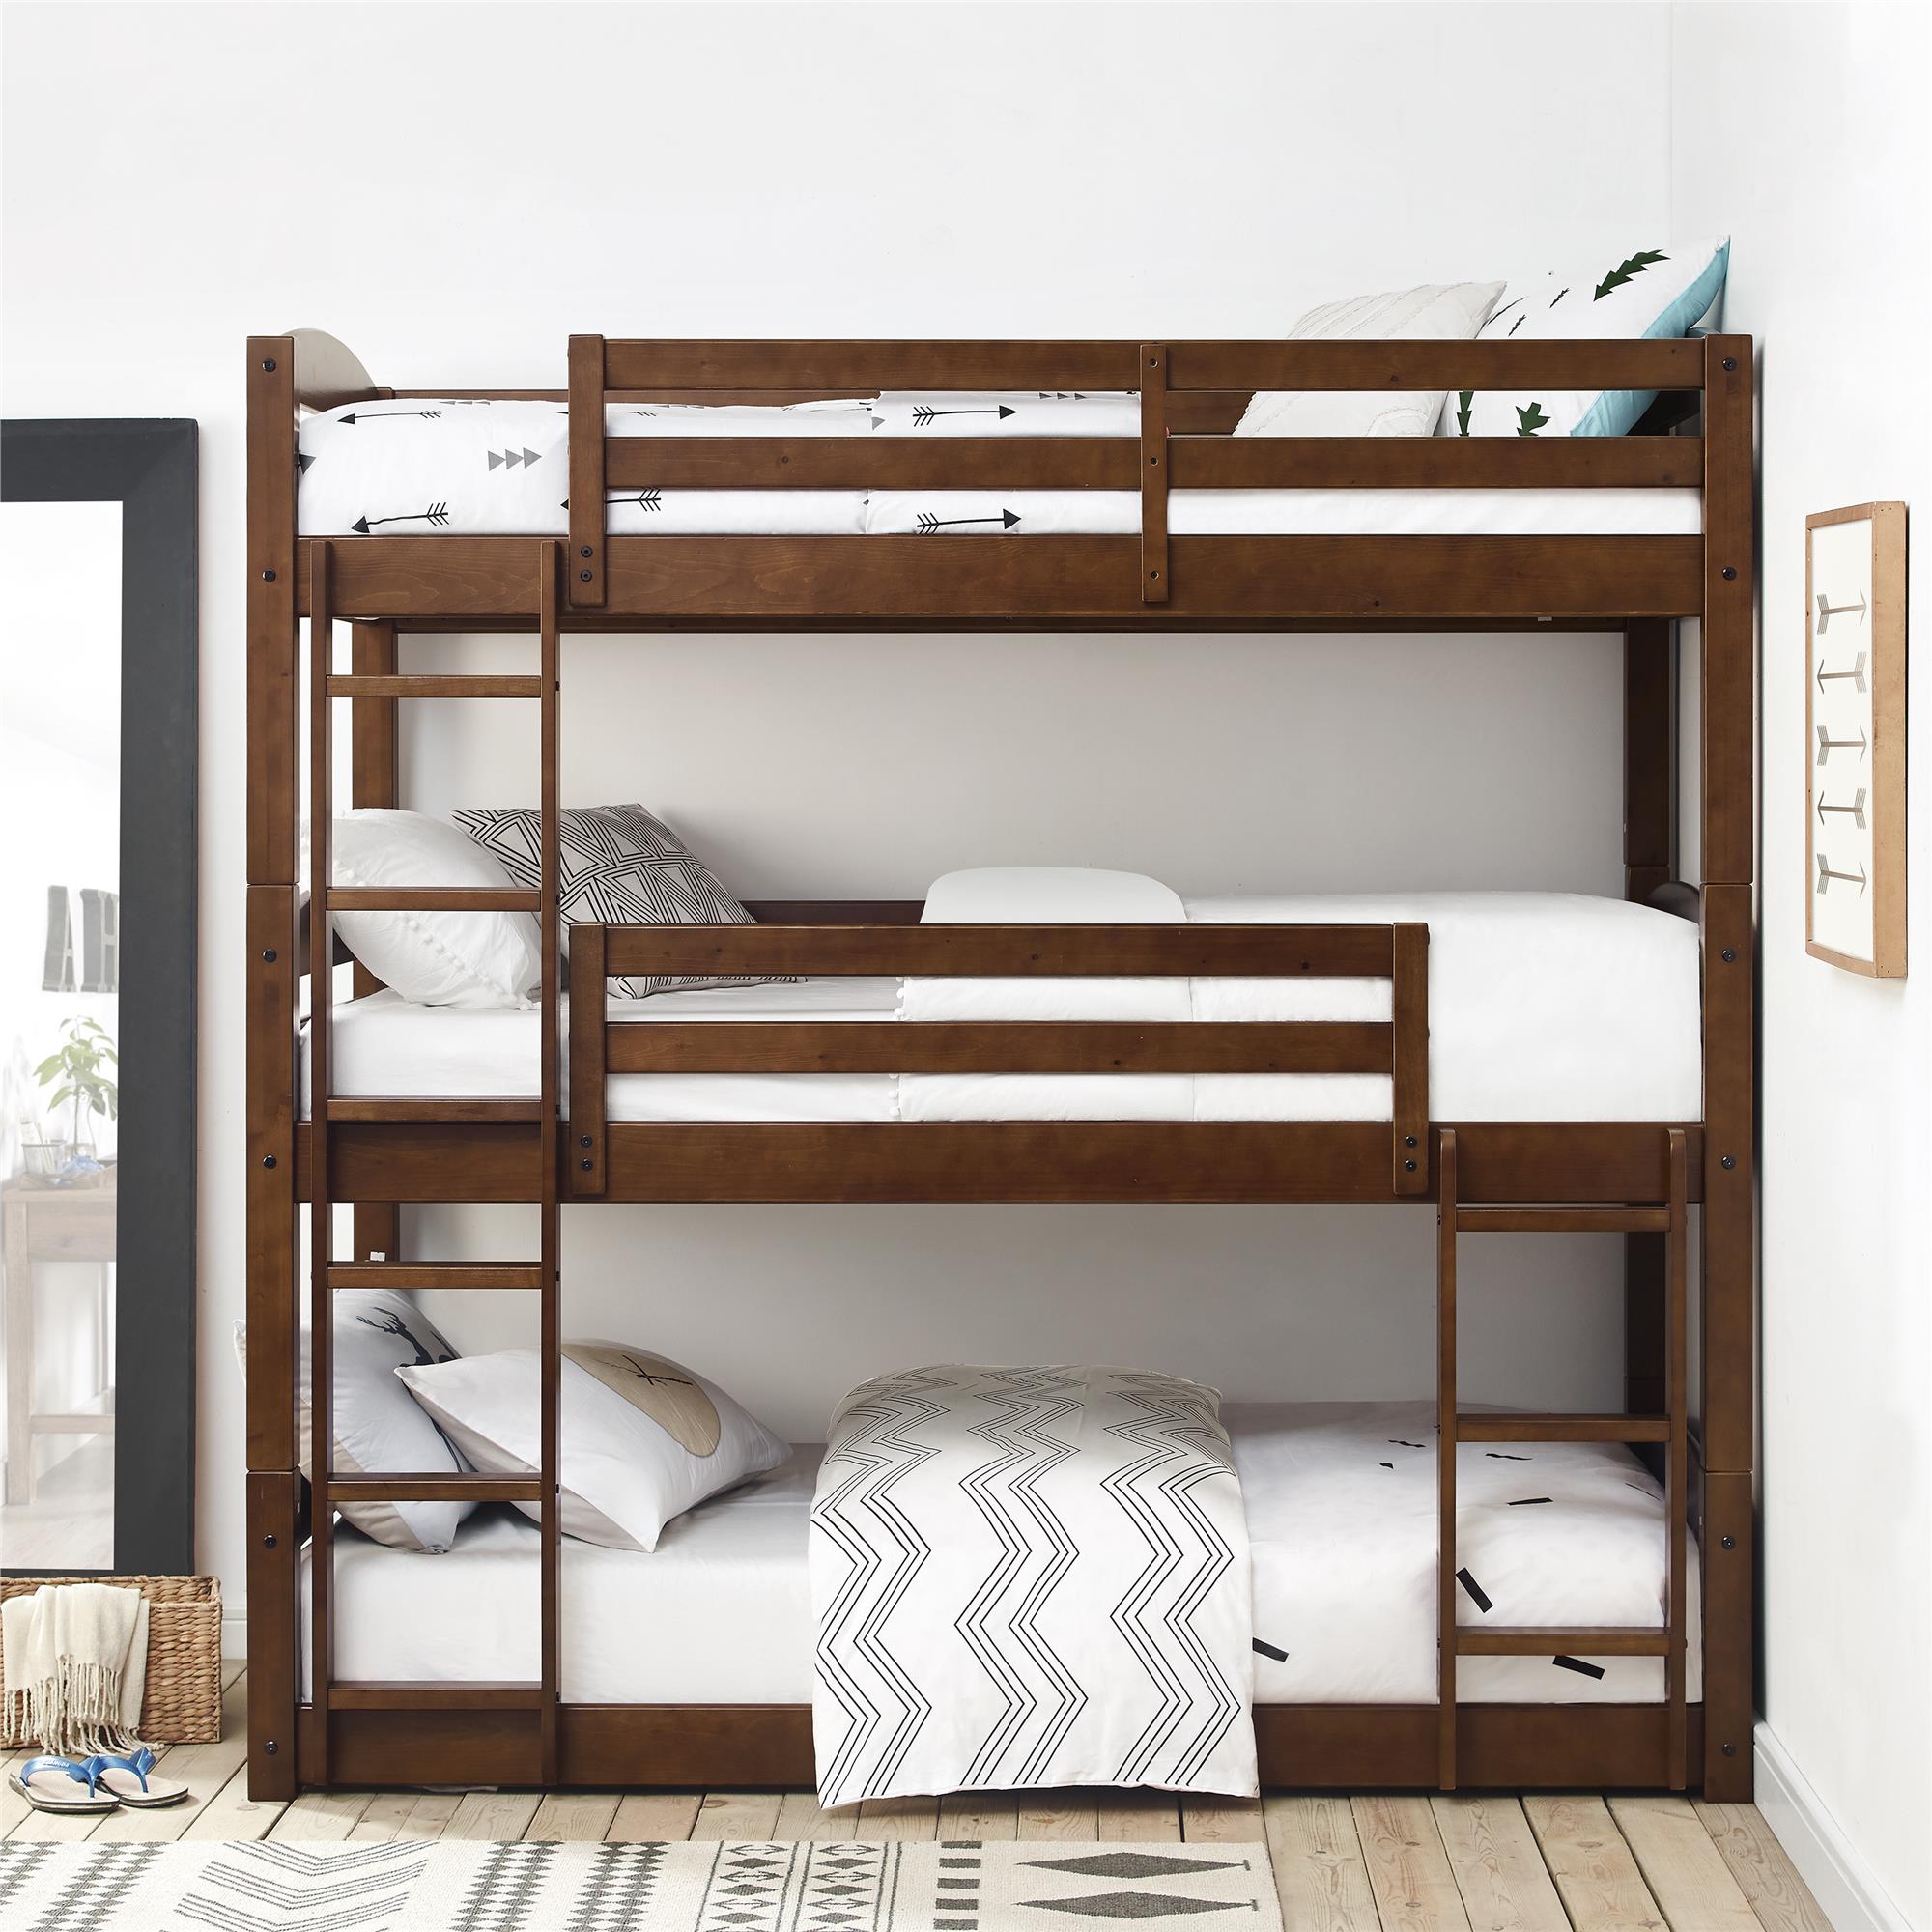 Better Homes & Gardens Tristan Kids' Convertible Triple Bunk Bed, Twin Over Twin Over Twin, Mocha - image 1 of 8